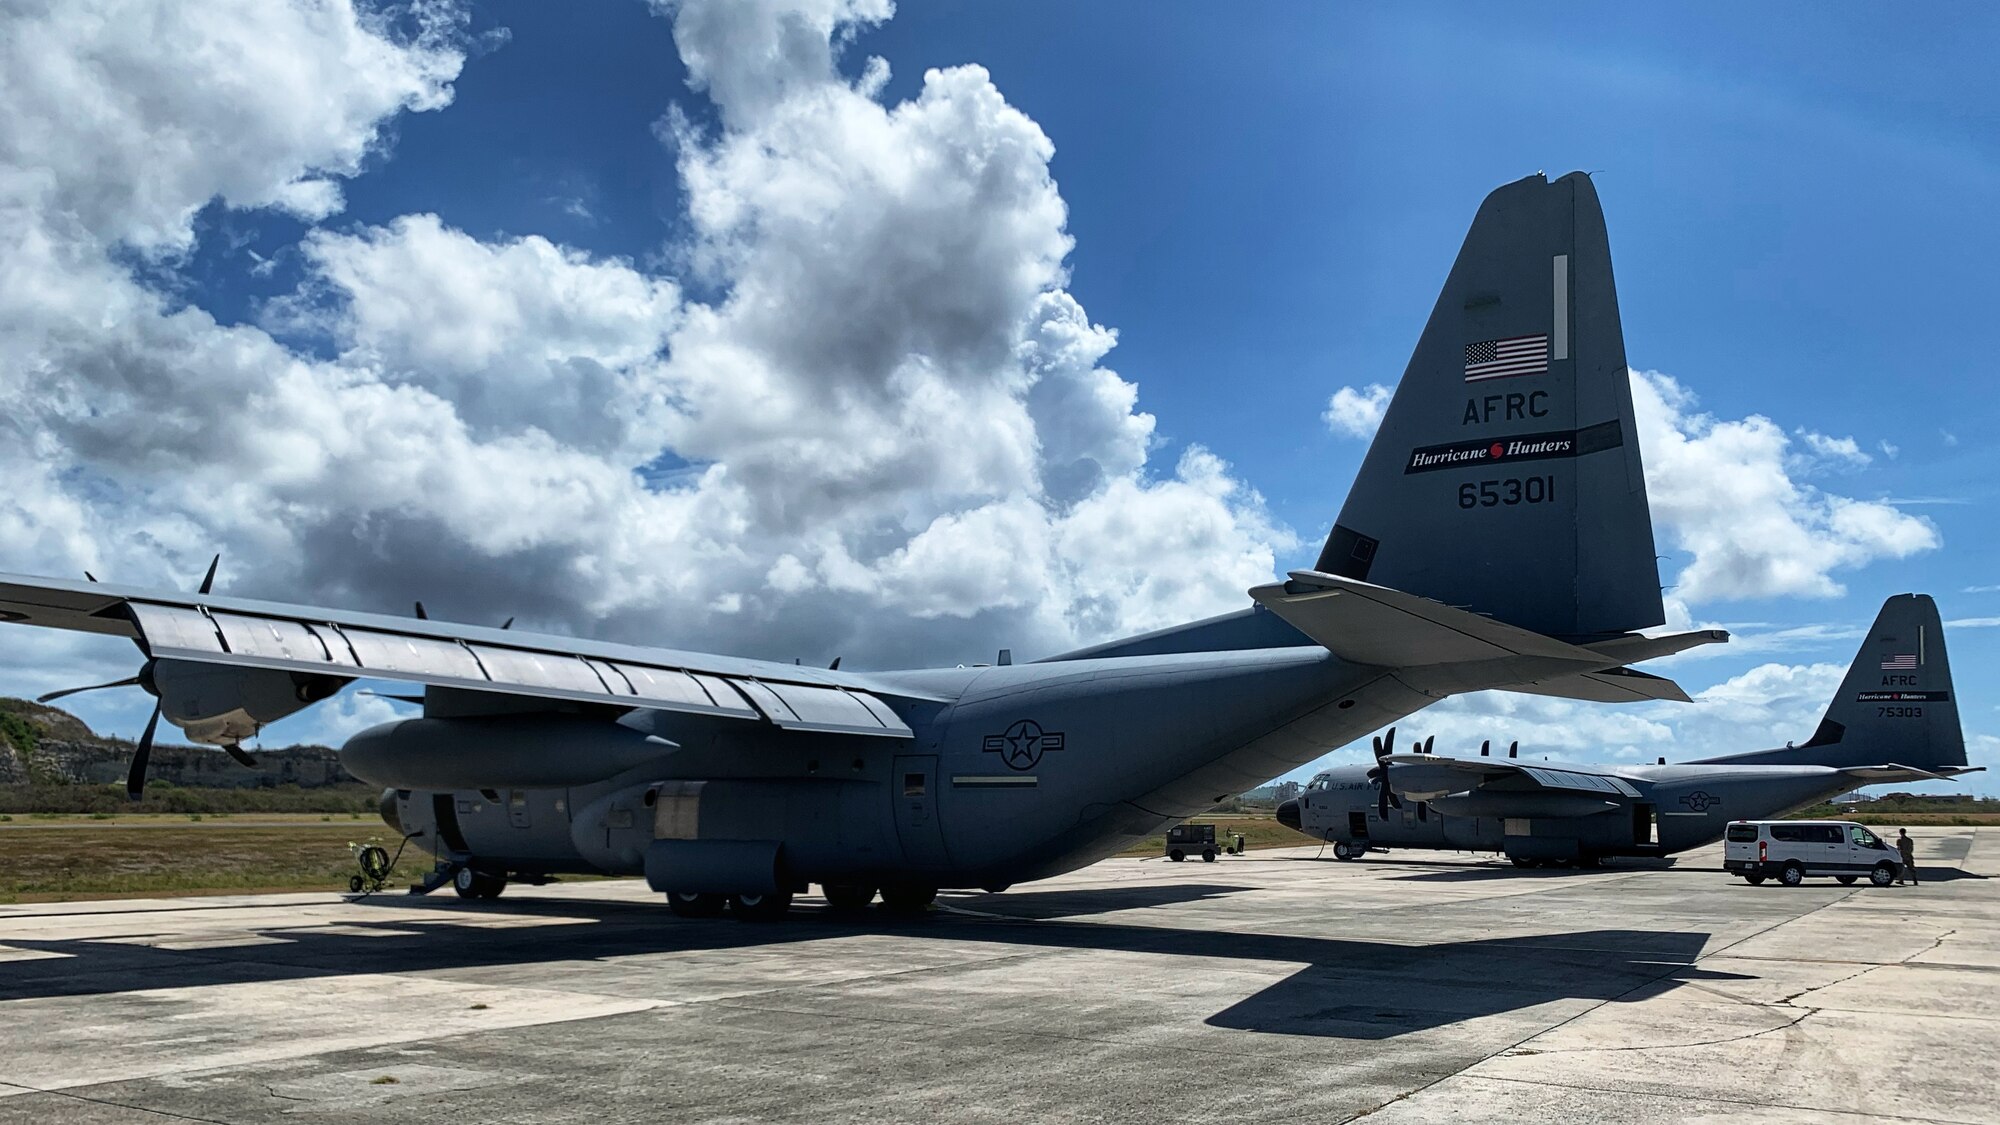 Two WC-130J Super Hercules aircraft are prepared to fly training missions, June 16. The Hurricane Hunters deployed to St. Croix, U.S. Virgin Islands, to fly training missions over the Caribbean in preparation for the 2020 hurricane season. (U.S. Air Force photo by Tech. Sgt. Christopher Carranza)